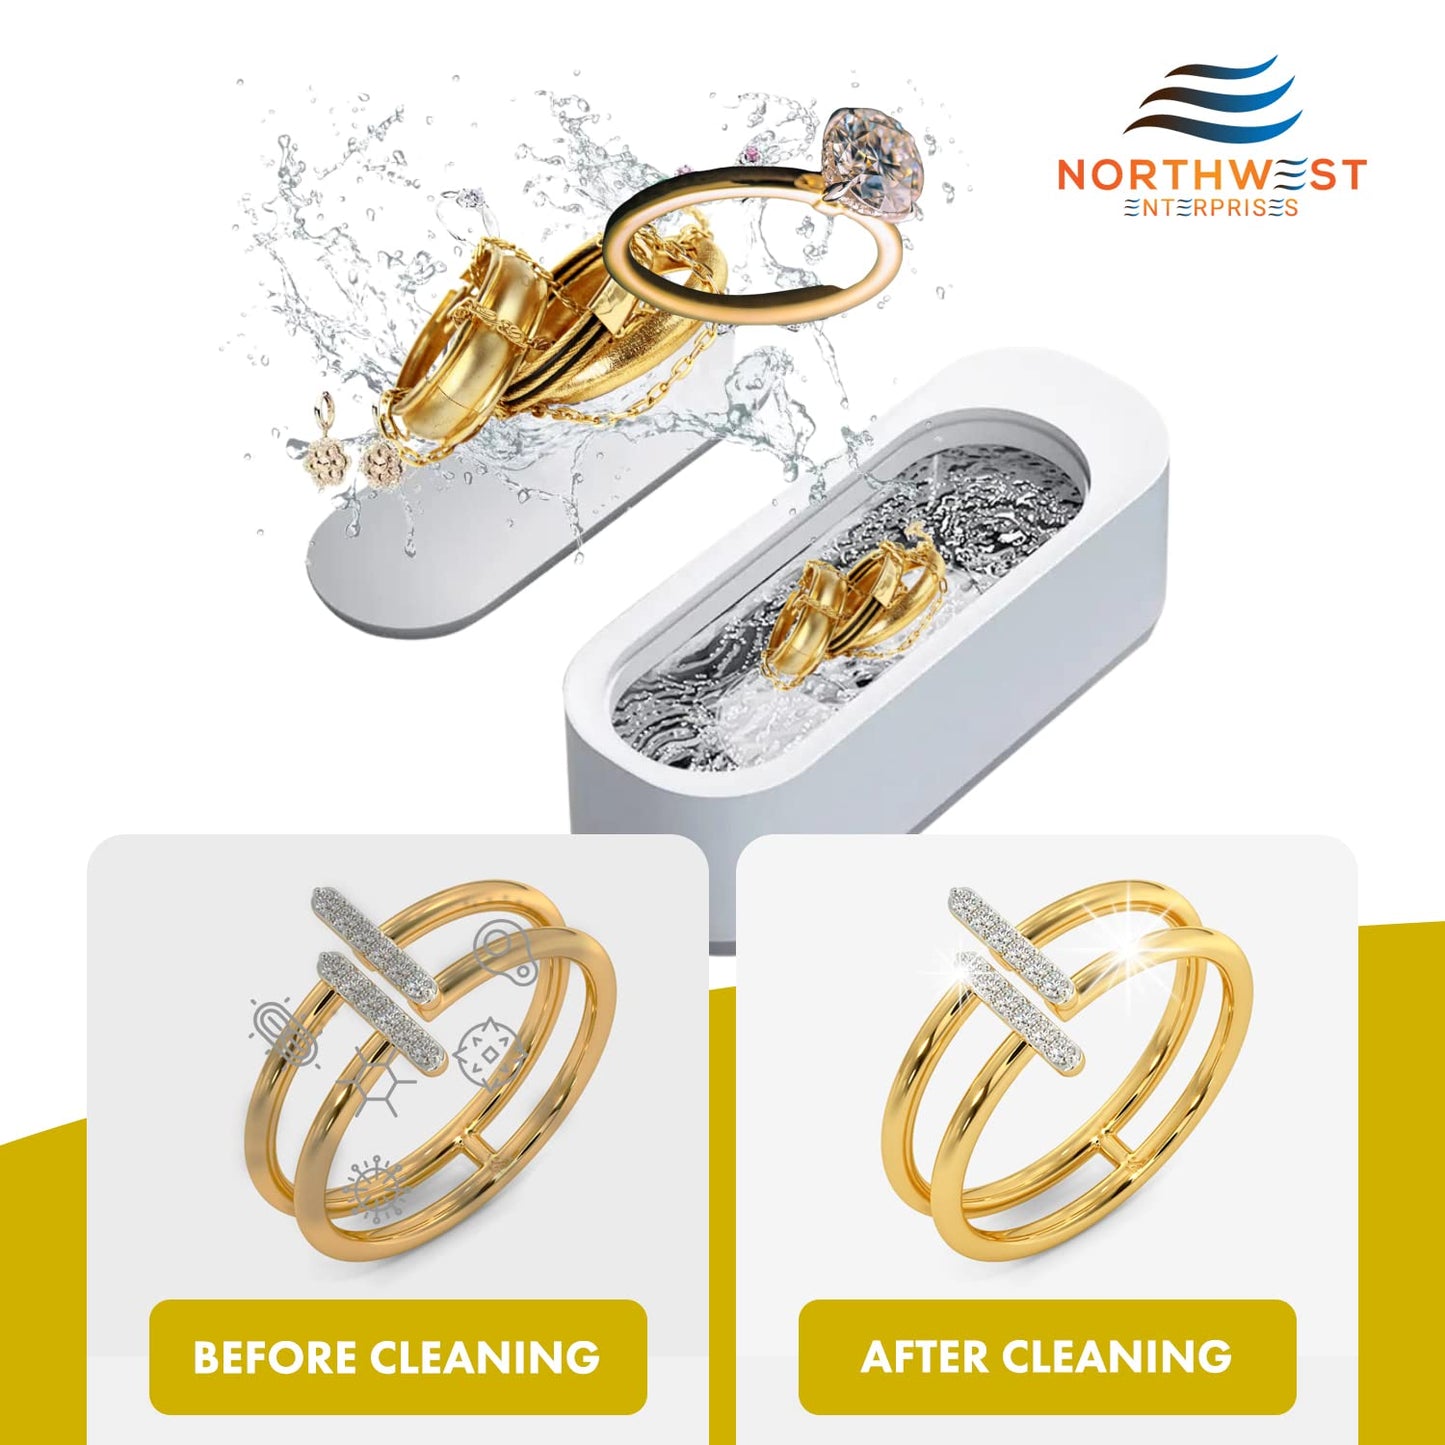 Gold Jewelry Cleaner, Ultrasonic Jewelry Cleaner Solution Concentrate Scientifically Engineered Uniquely for Gold Jewelry (2)